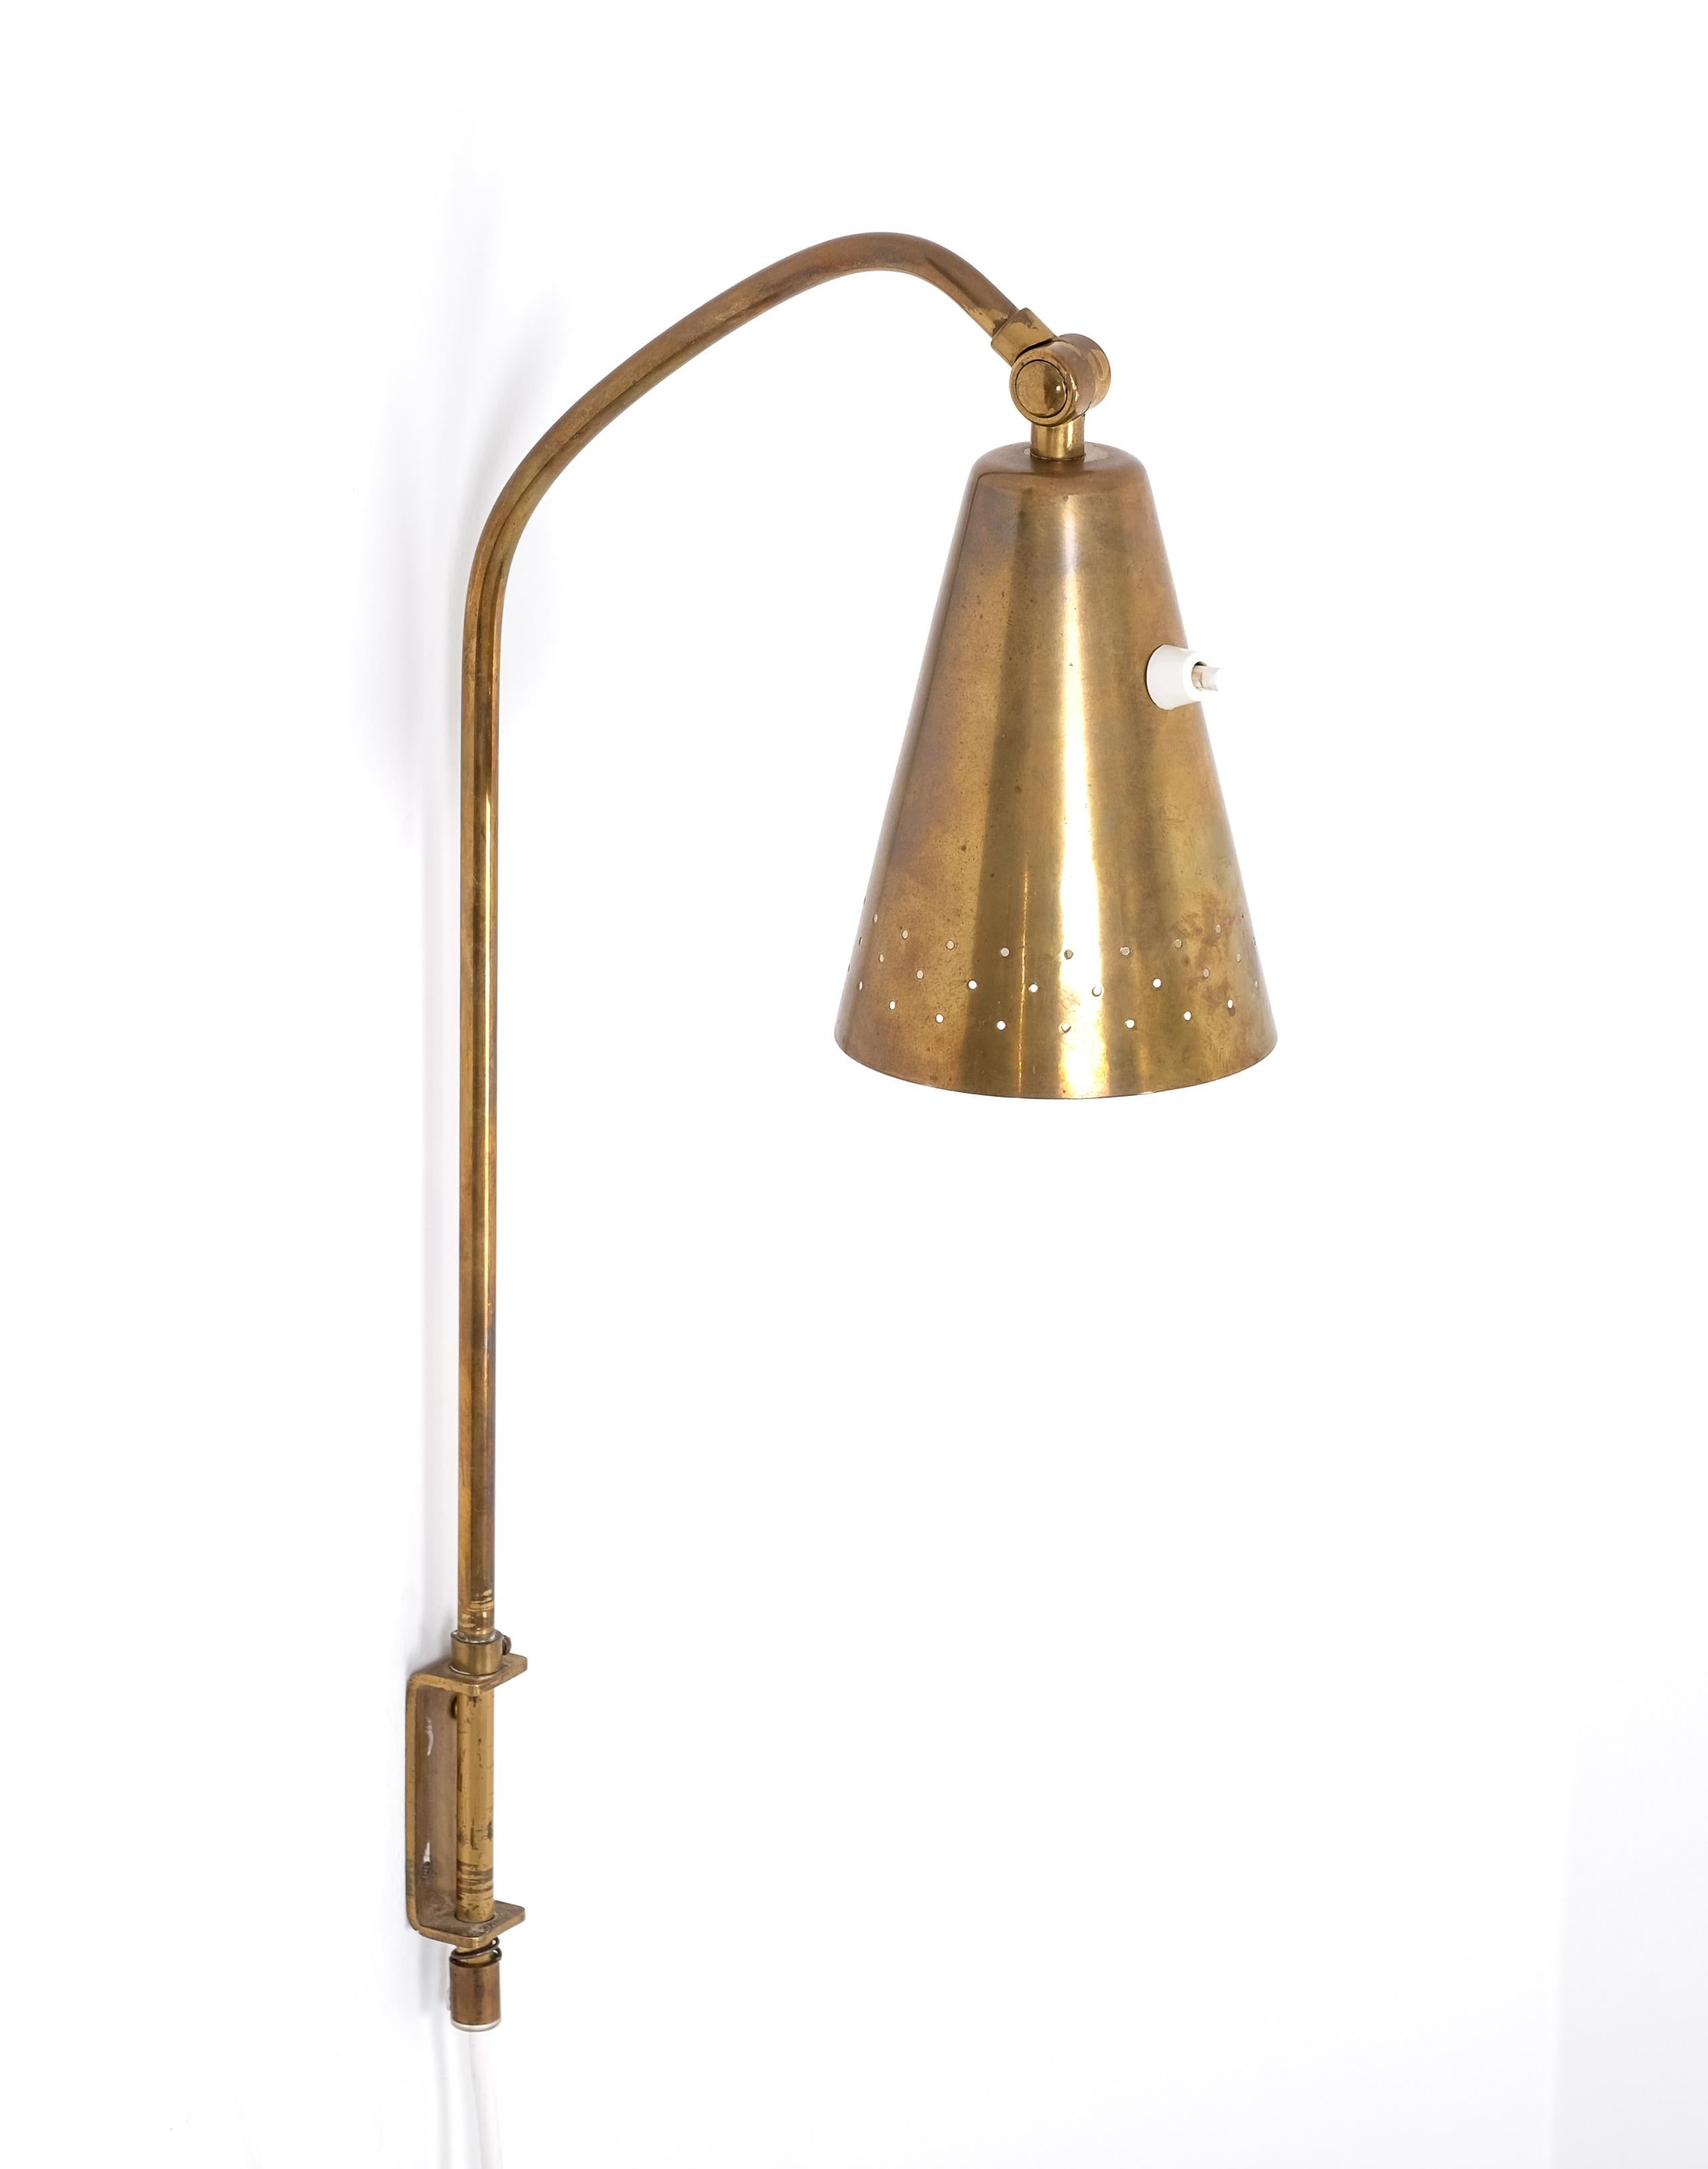 Scandinavian Modern Pair of Brass Wall Lamps by Alf Svensson, Sweden, 1950s For Sale